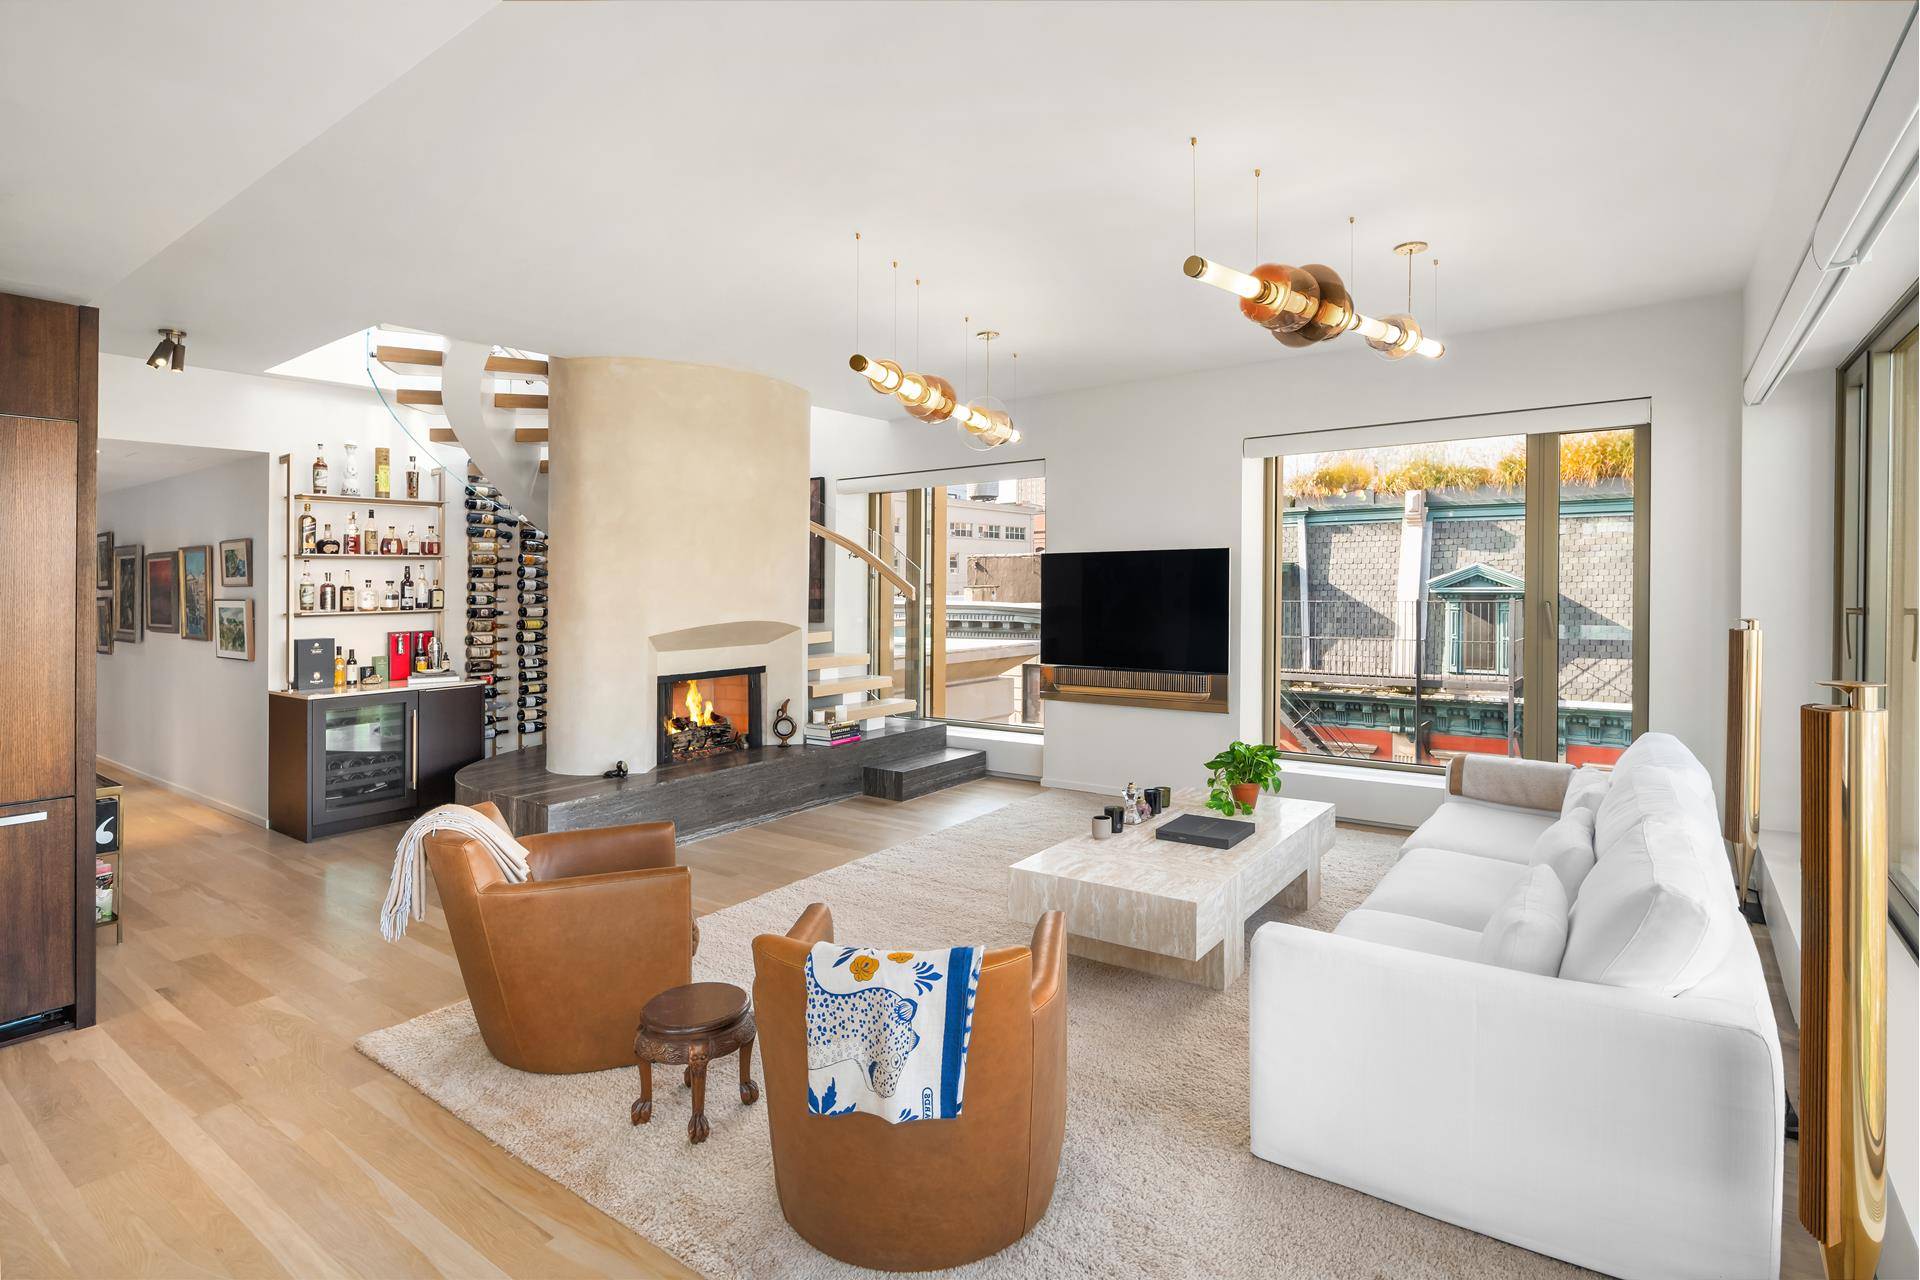 RESIDENCE PHC AT 75 KENMARE STREETA showstopper downtown corner Penthouse residence situated in a New Development condominium building located in one of downtown's hottest neighborhoods, Nolita.